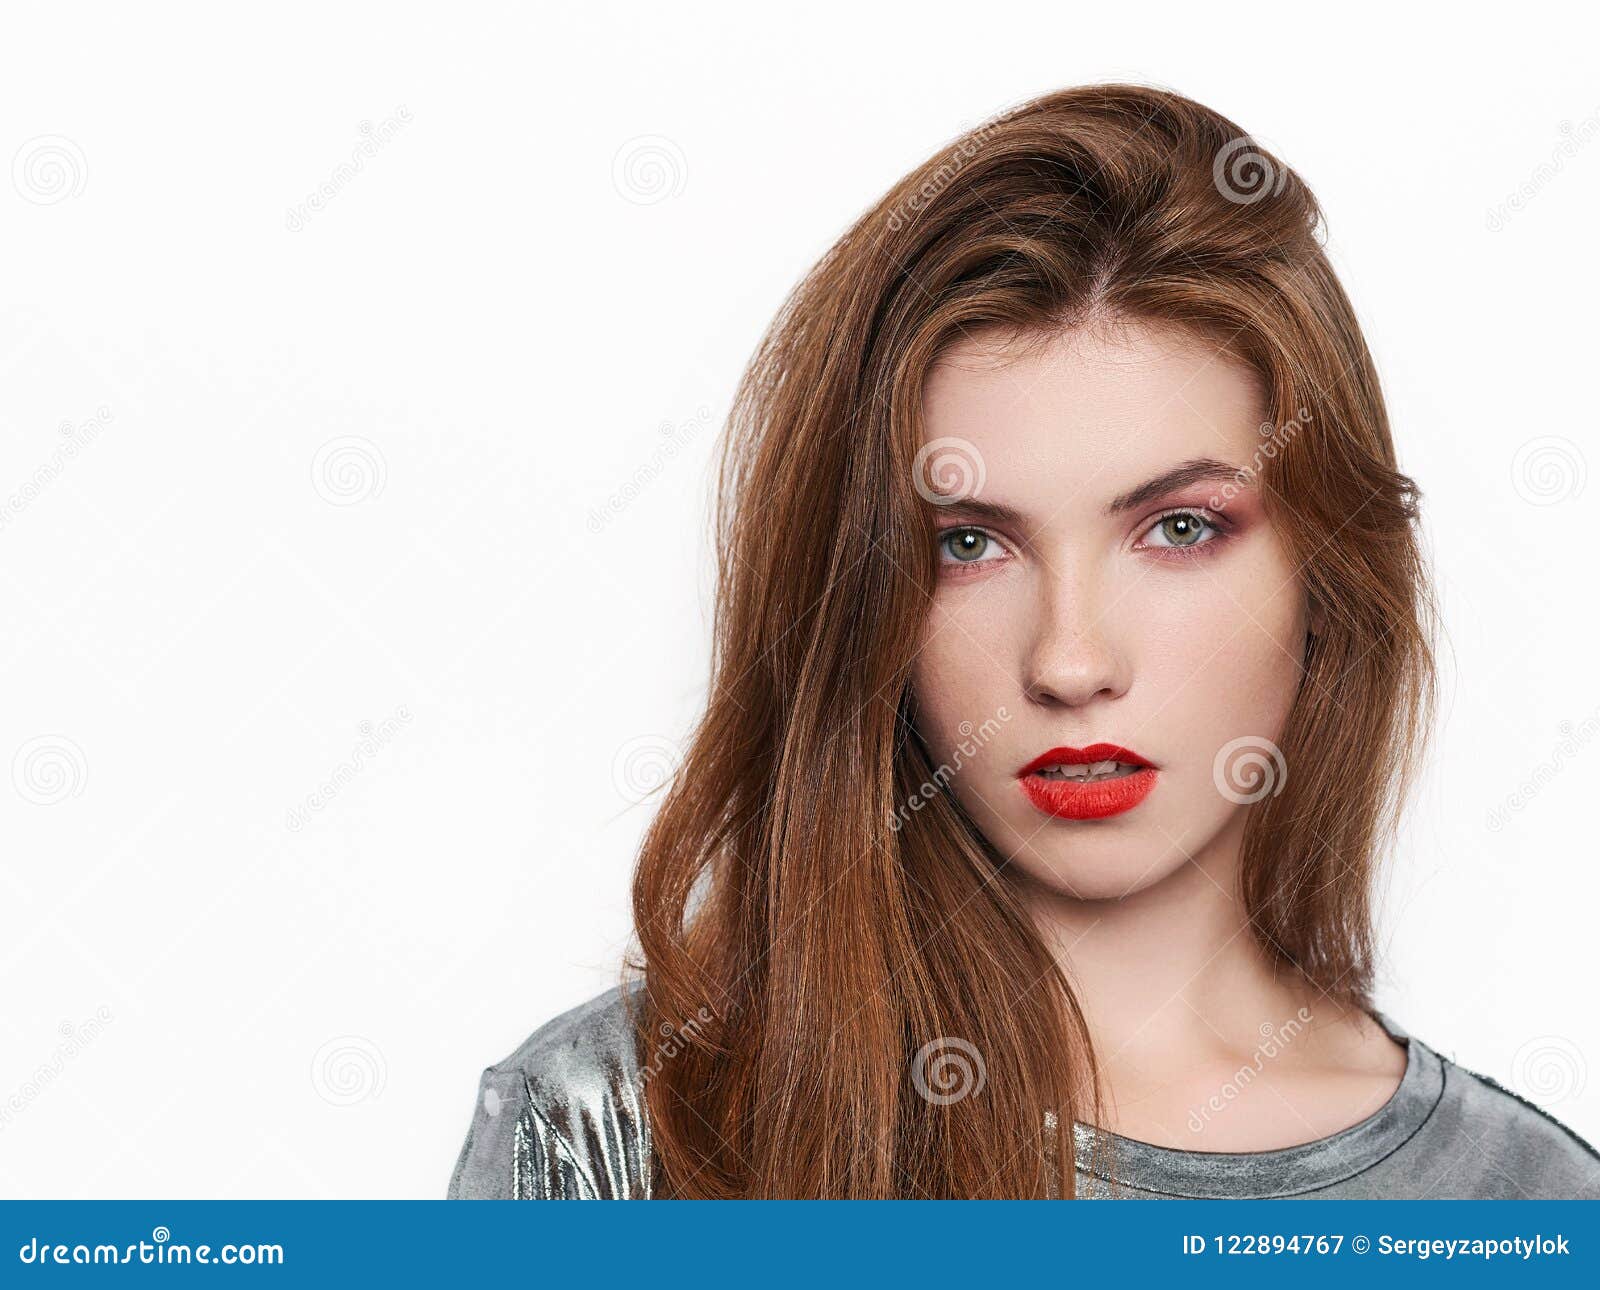 Headshot of Young Beautiful Excited Woman with Gorgeous Natural Red ...